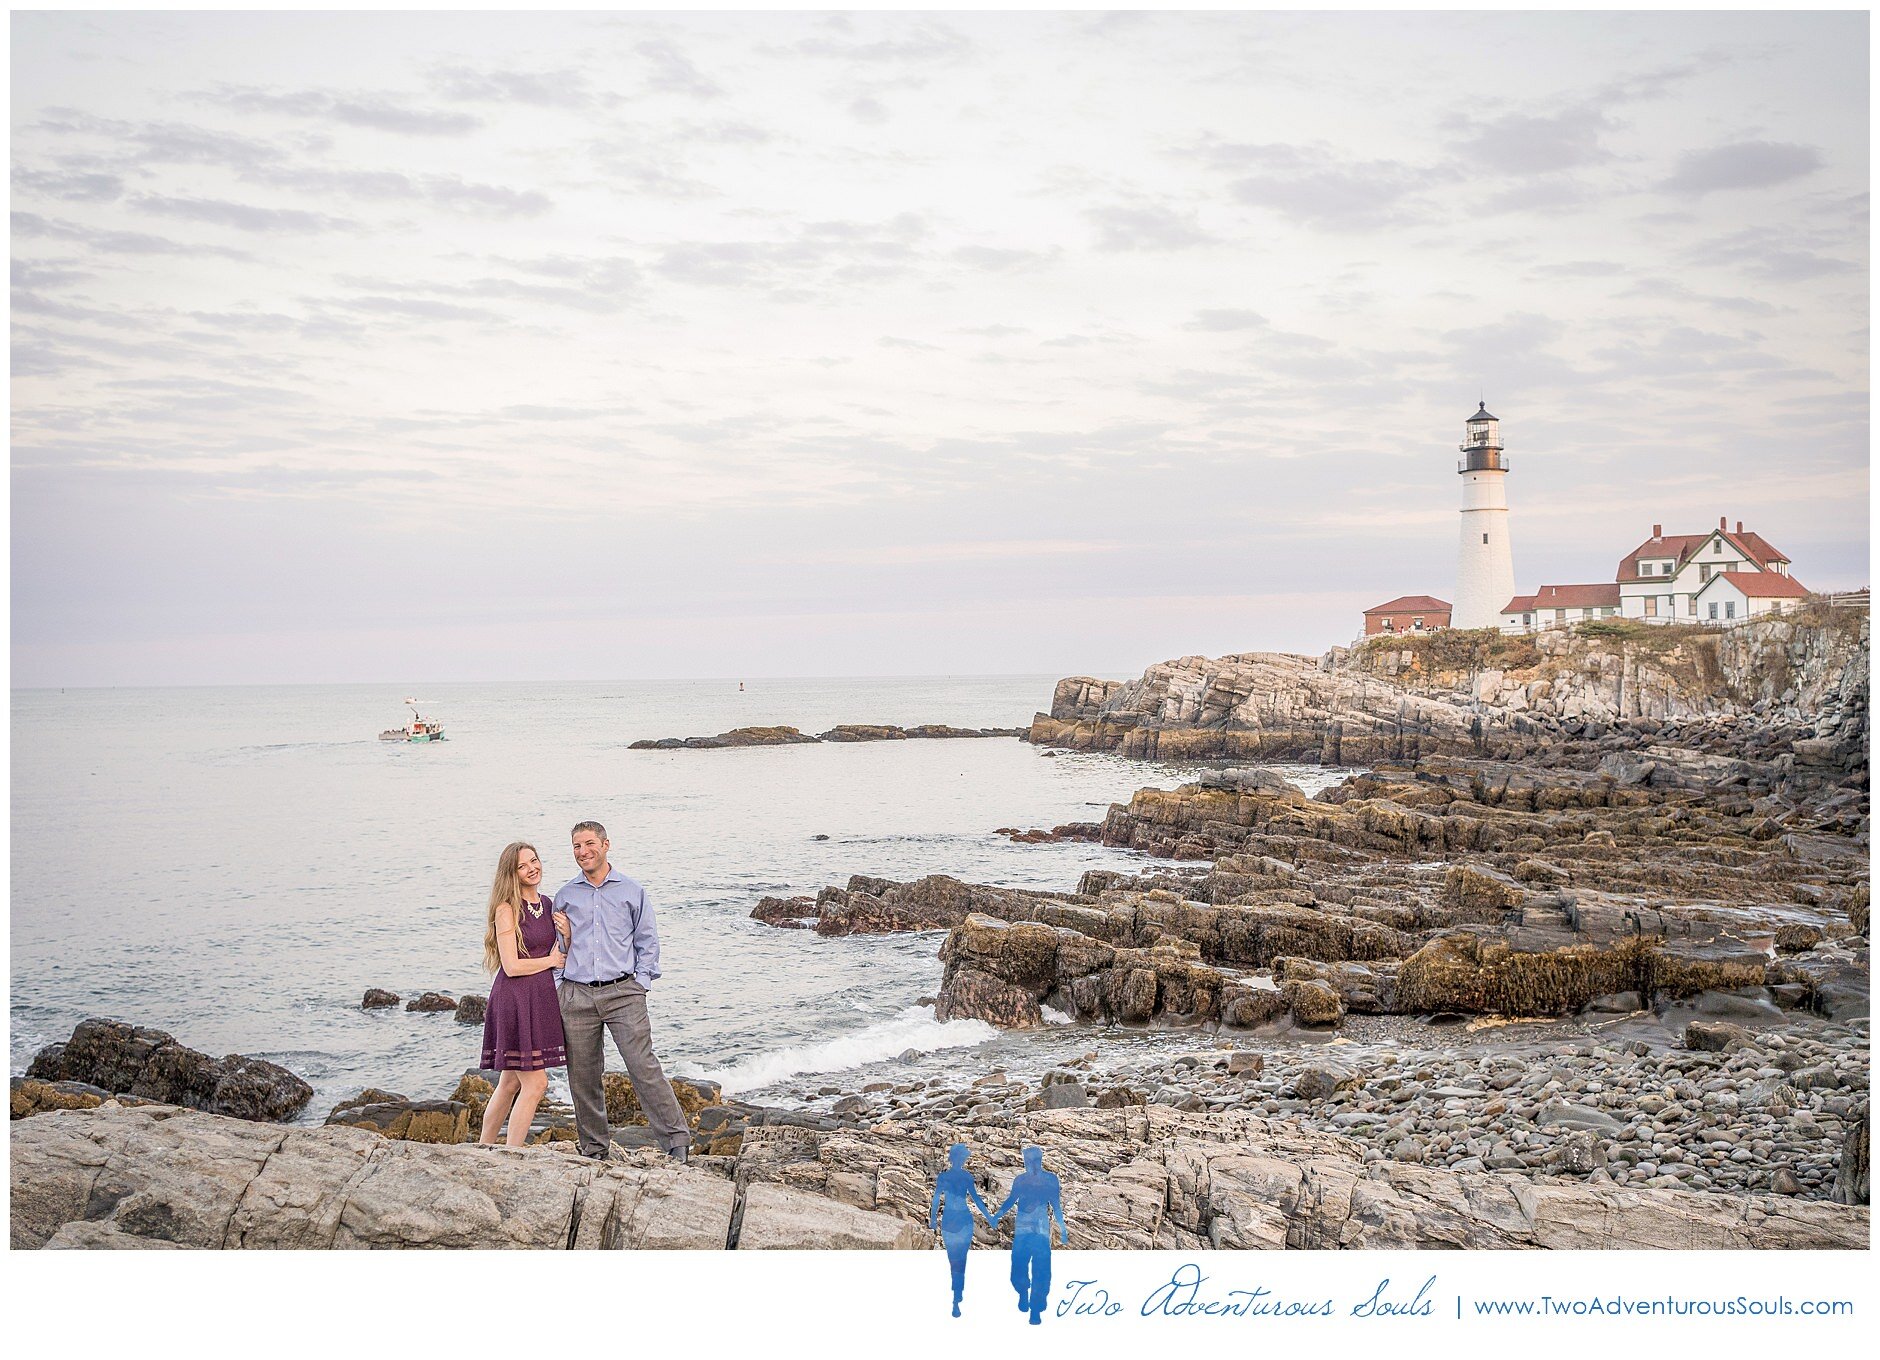 What to do in maine, Maine wedding Photographers, Two Adventurous Souls - 062321_0003.jpg